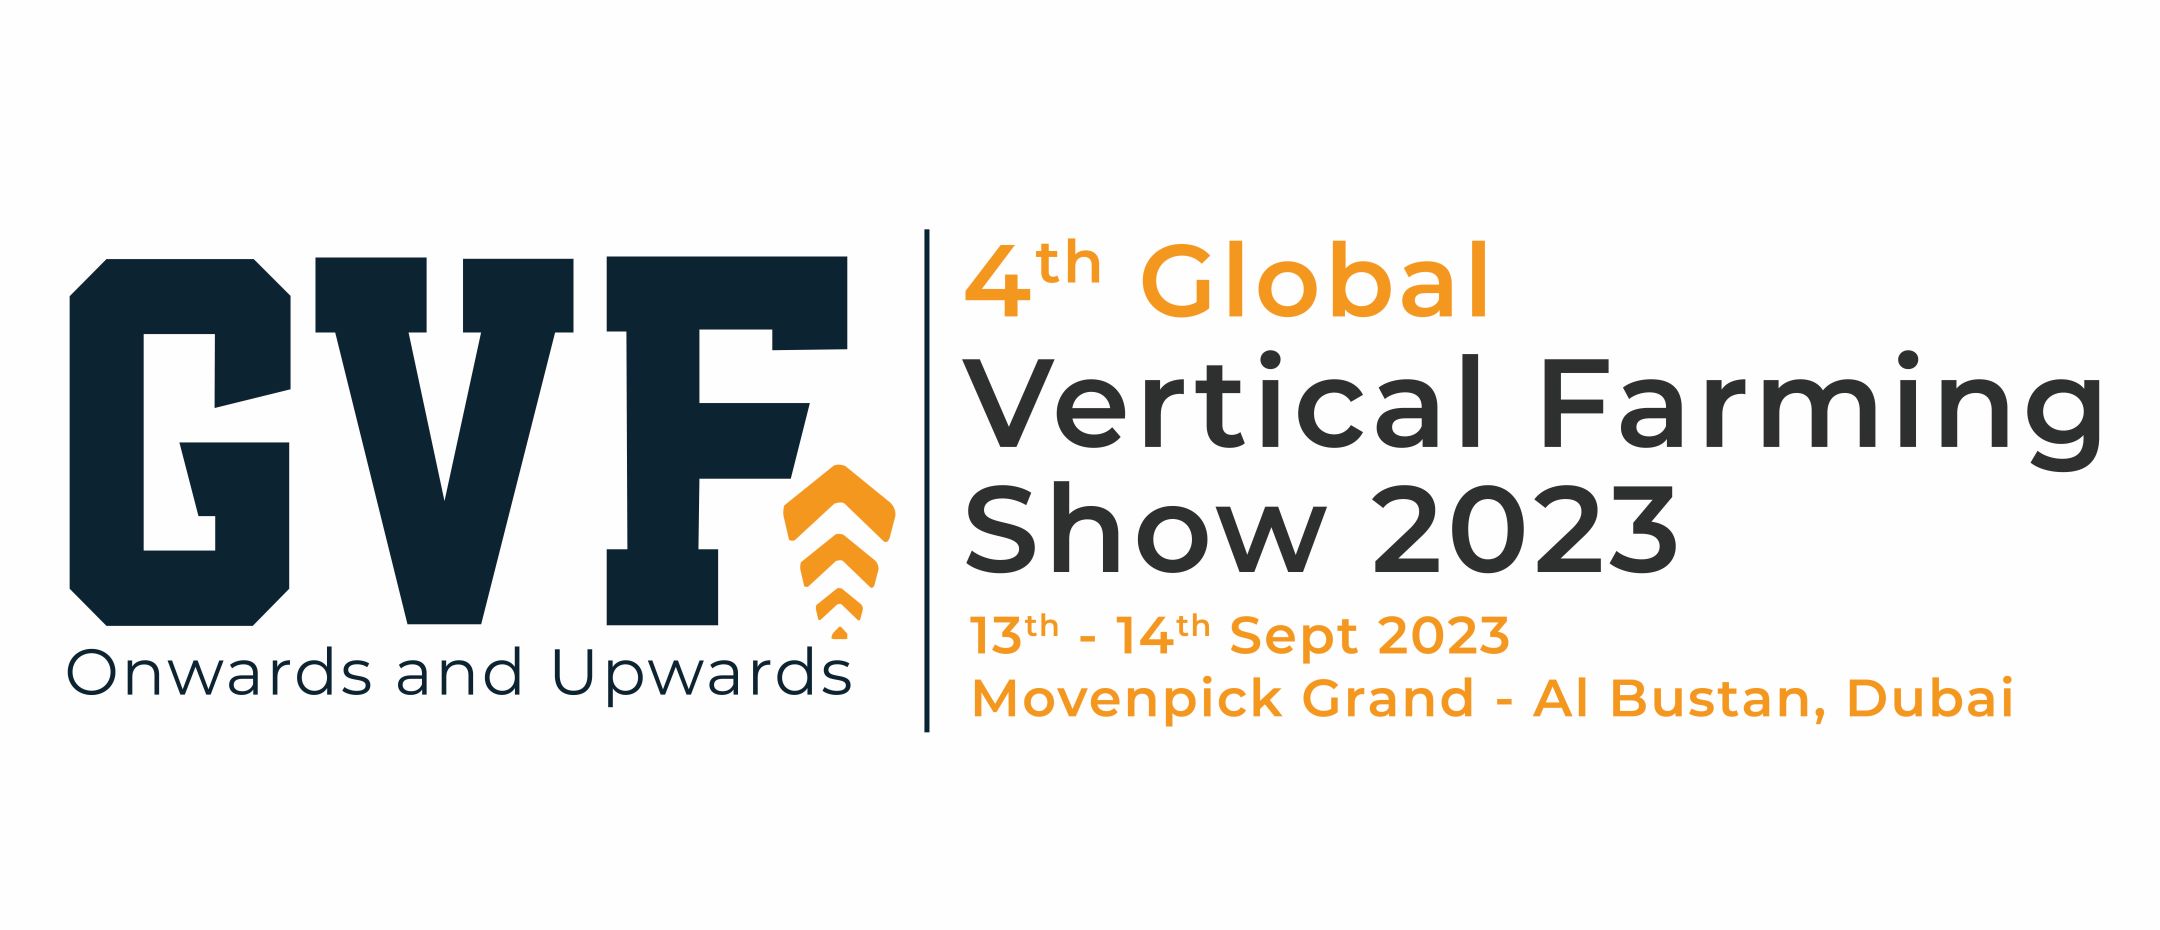 Days ahead of going live, GVF announces Vertical Future as the Strategic Partner| Join the adventure on 13-14 Sept’ 23 in Dubai